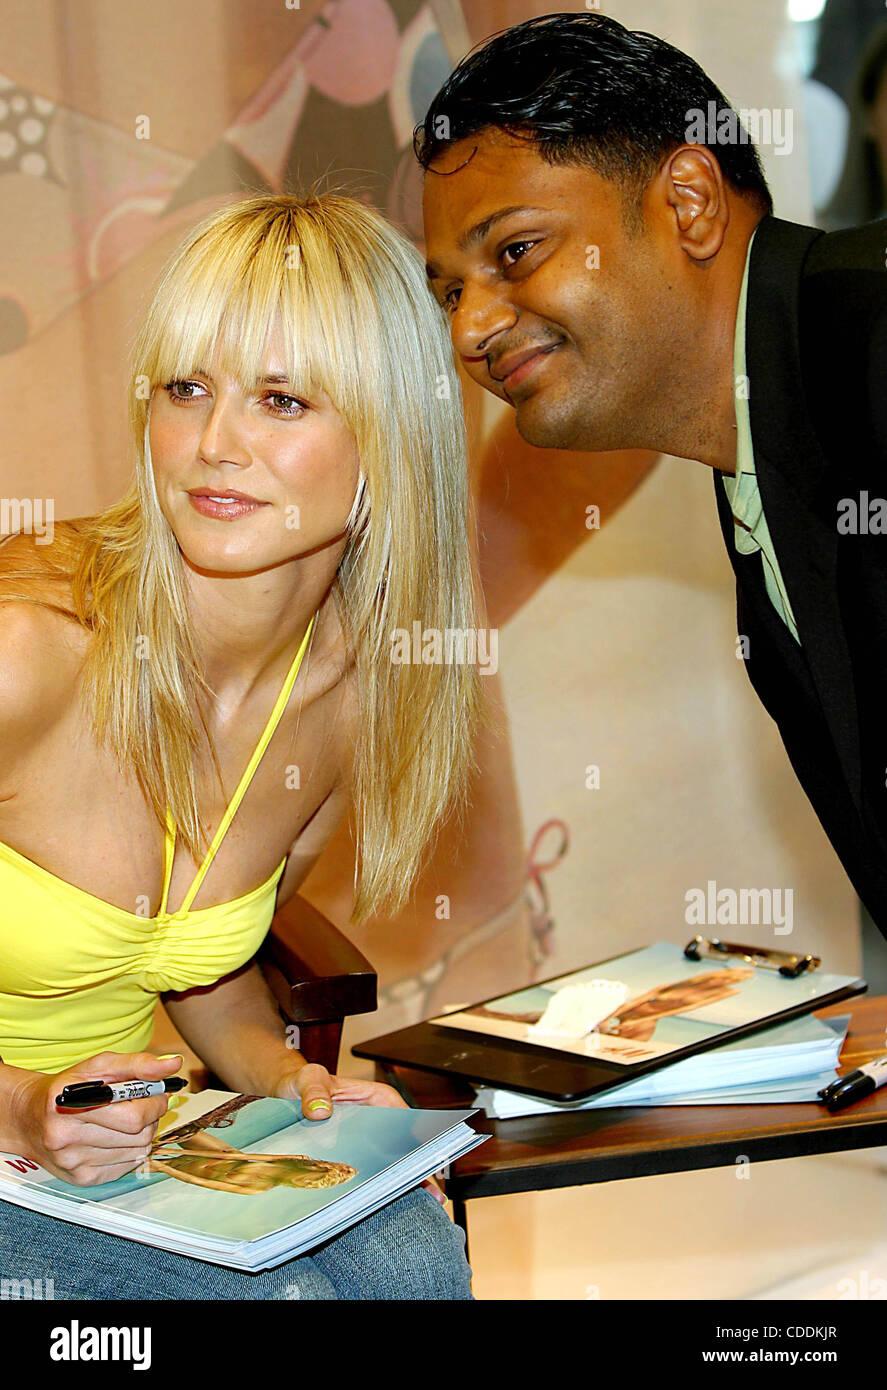 Jan. 1, 2011 - New York, New York, U.S. - K30686RM.IN STORE APPEARANCE BY  SUPERMODEL HEIDI KLUM..SHE IS SIGNING PICTURES OF HER LATEST BATHING SUIT  AD CAMPAIGN FOR THE NEW H&M SWIMWEAR